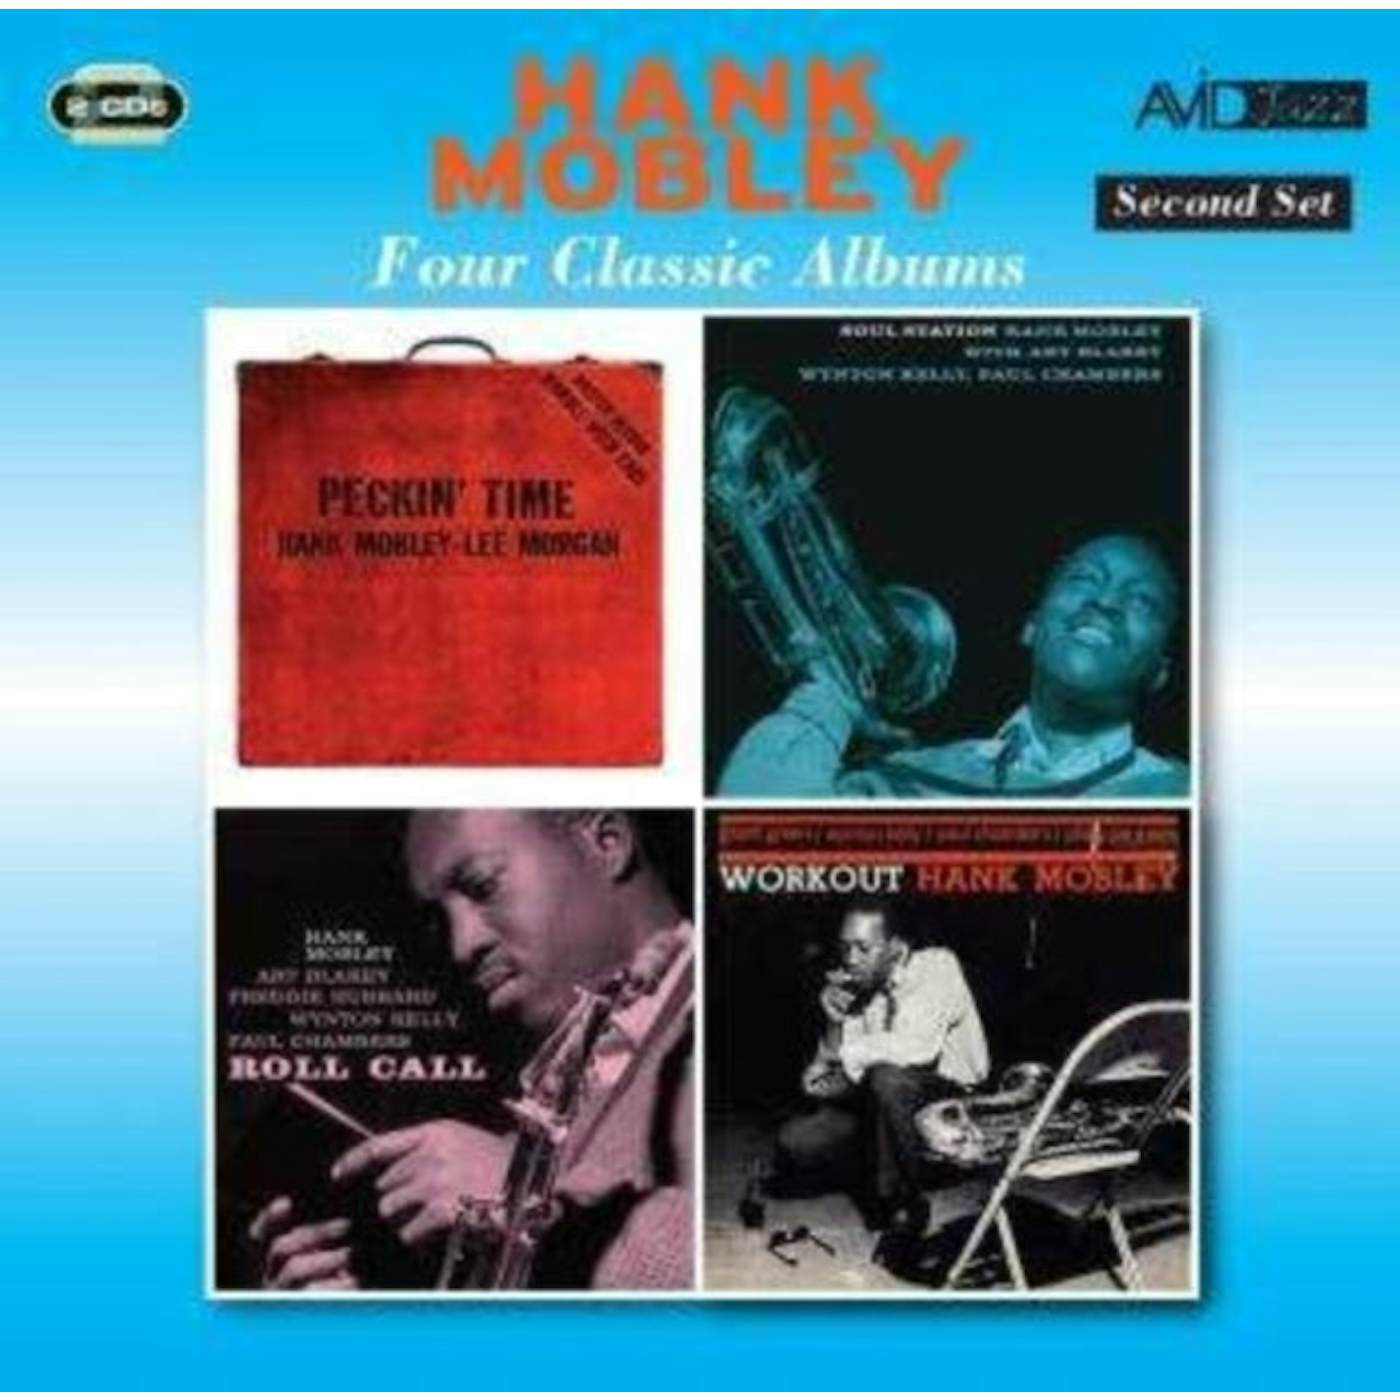 Hank Mobley CD - Four Classic Albums (Peckin' Time / Soul Station / Roll Call / Workout)